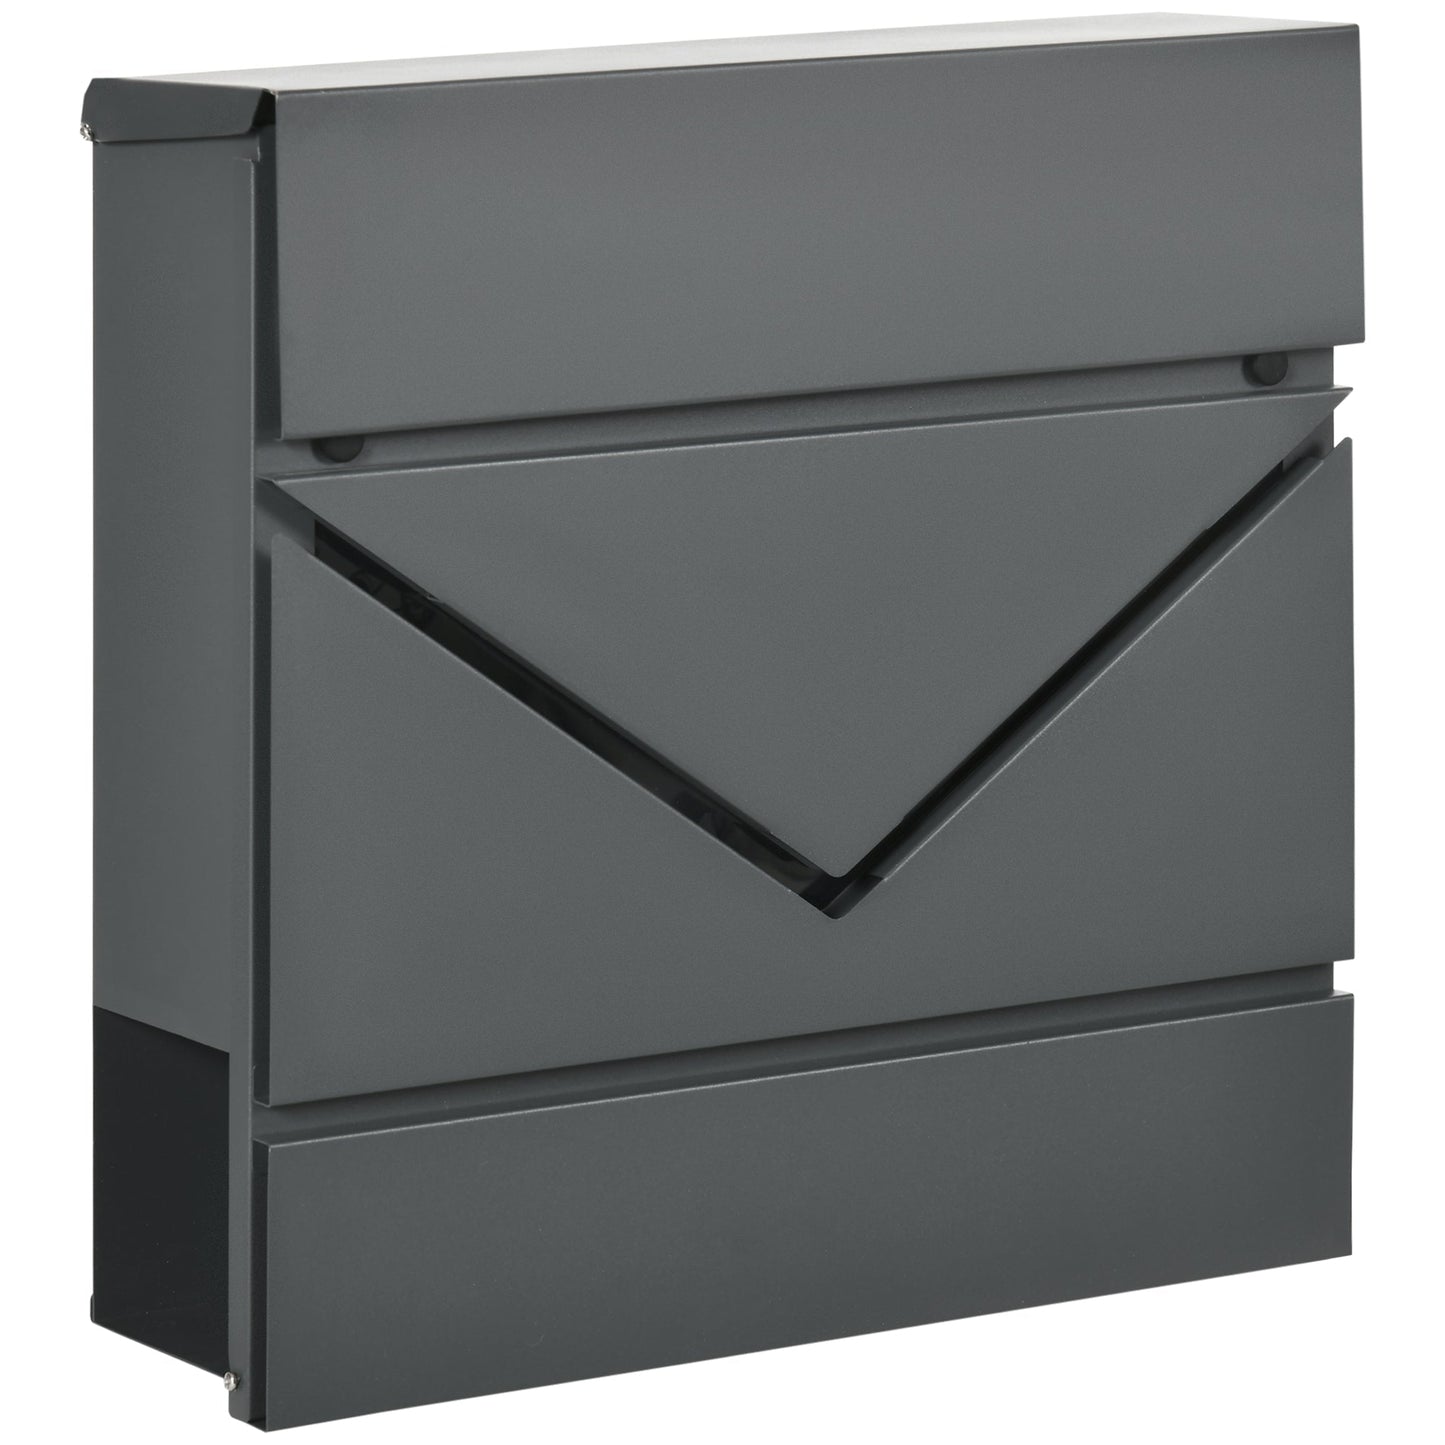 galvanized steel mailbox with junction and 2 safety keys, 37x10.5x37 cm, Grey